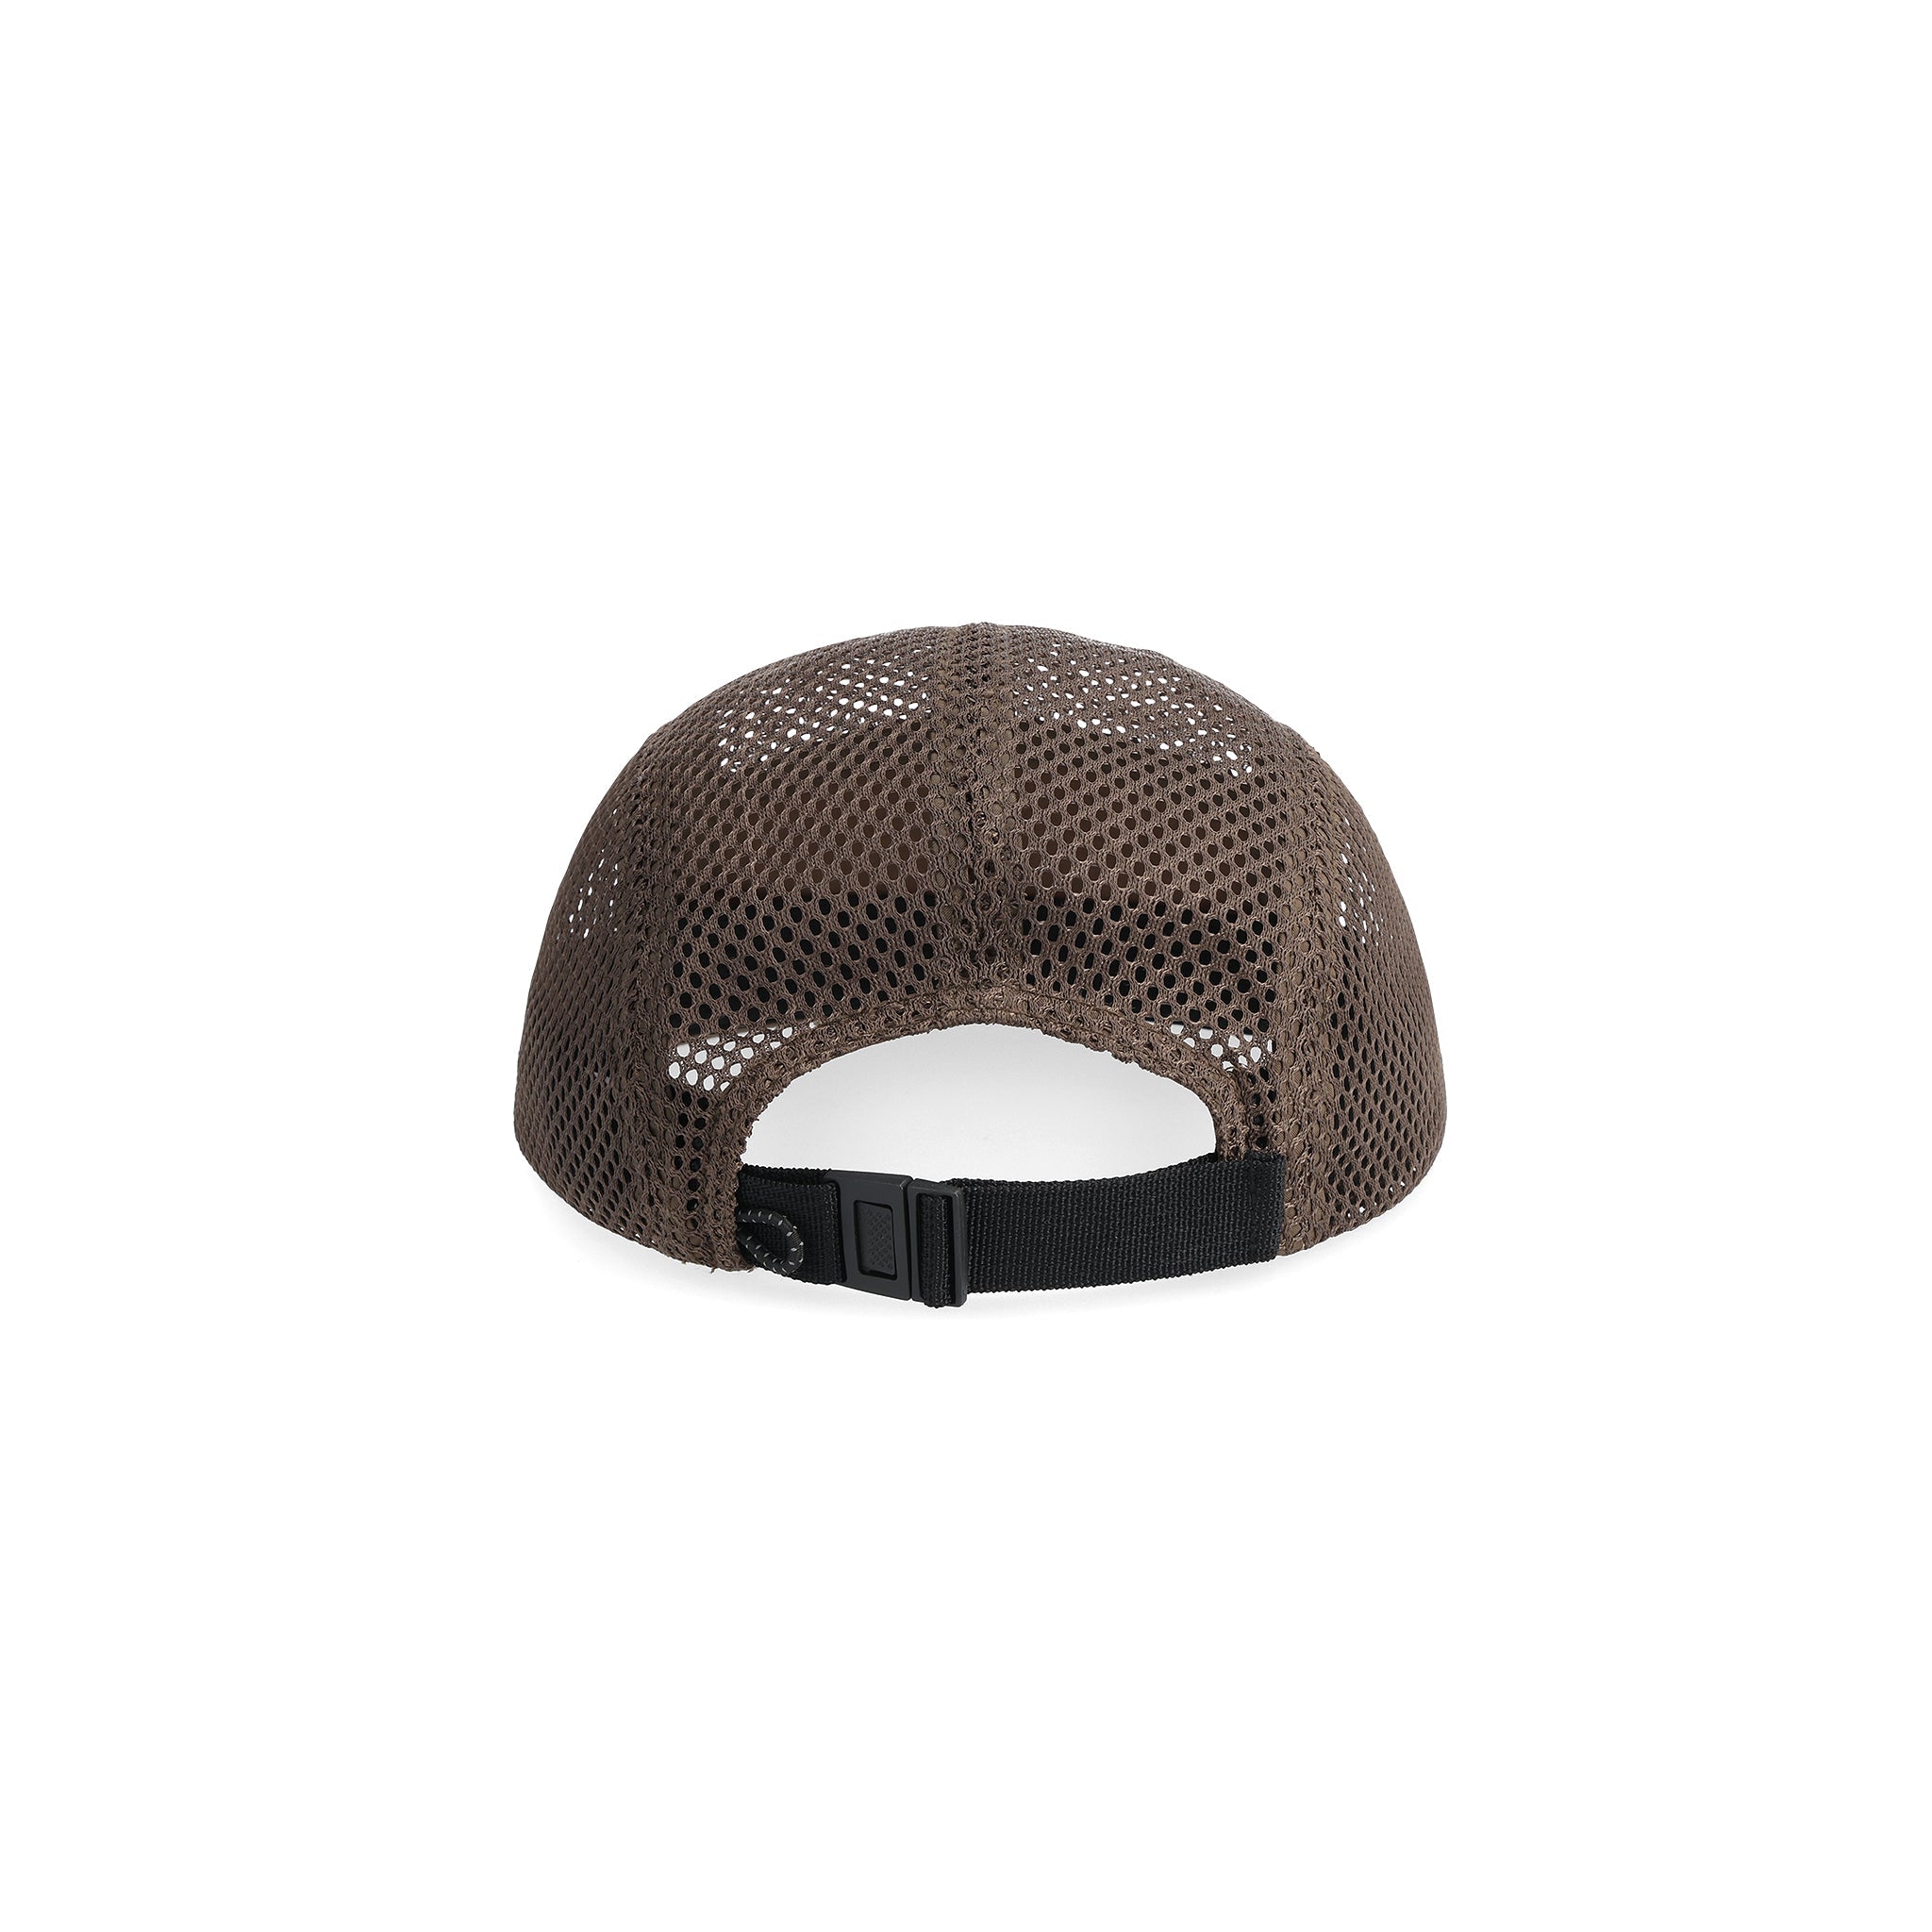 Back View of Topo Designs Global Hat in "Desert Palm"